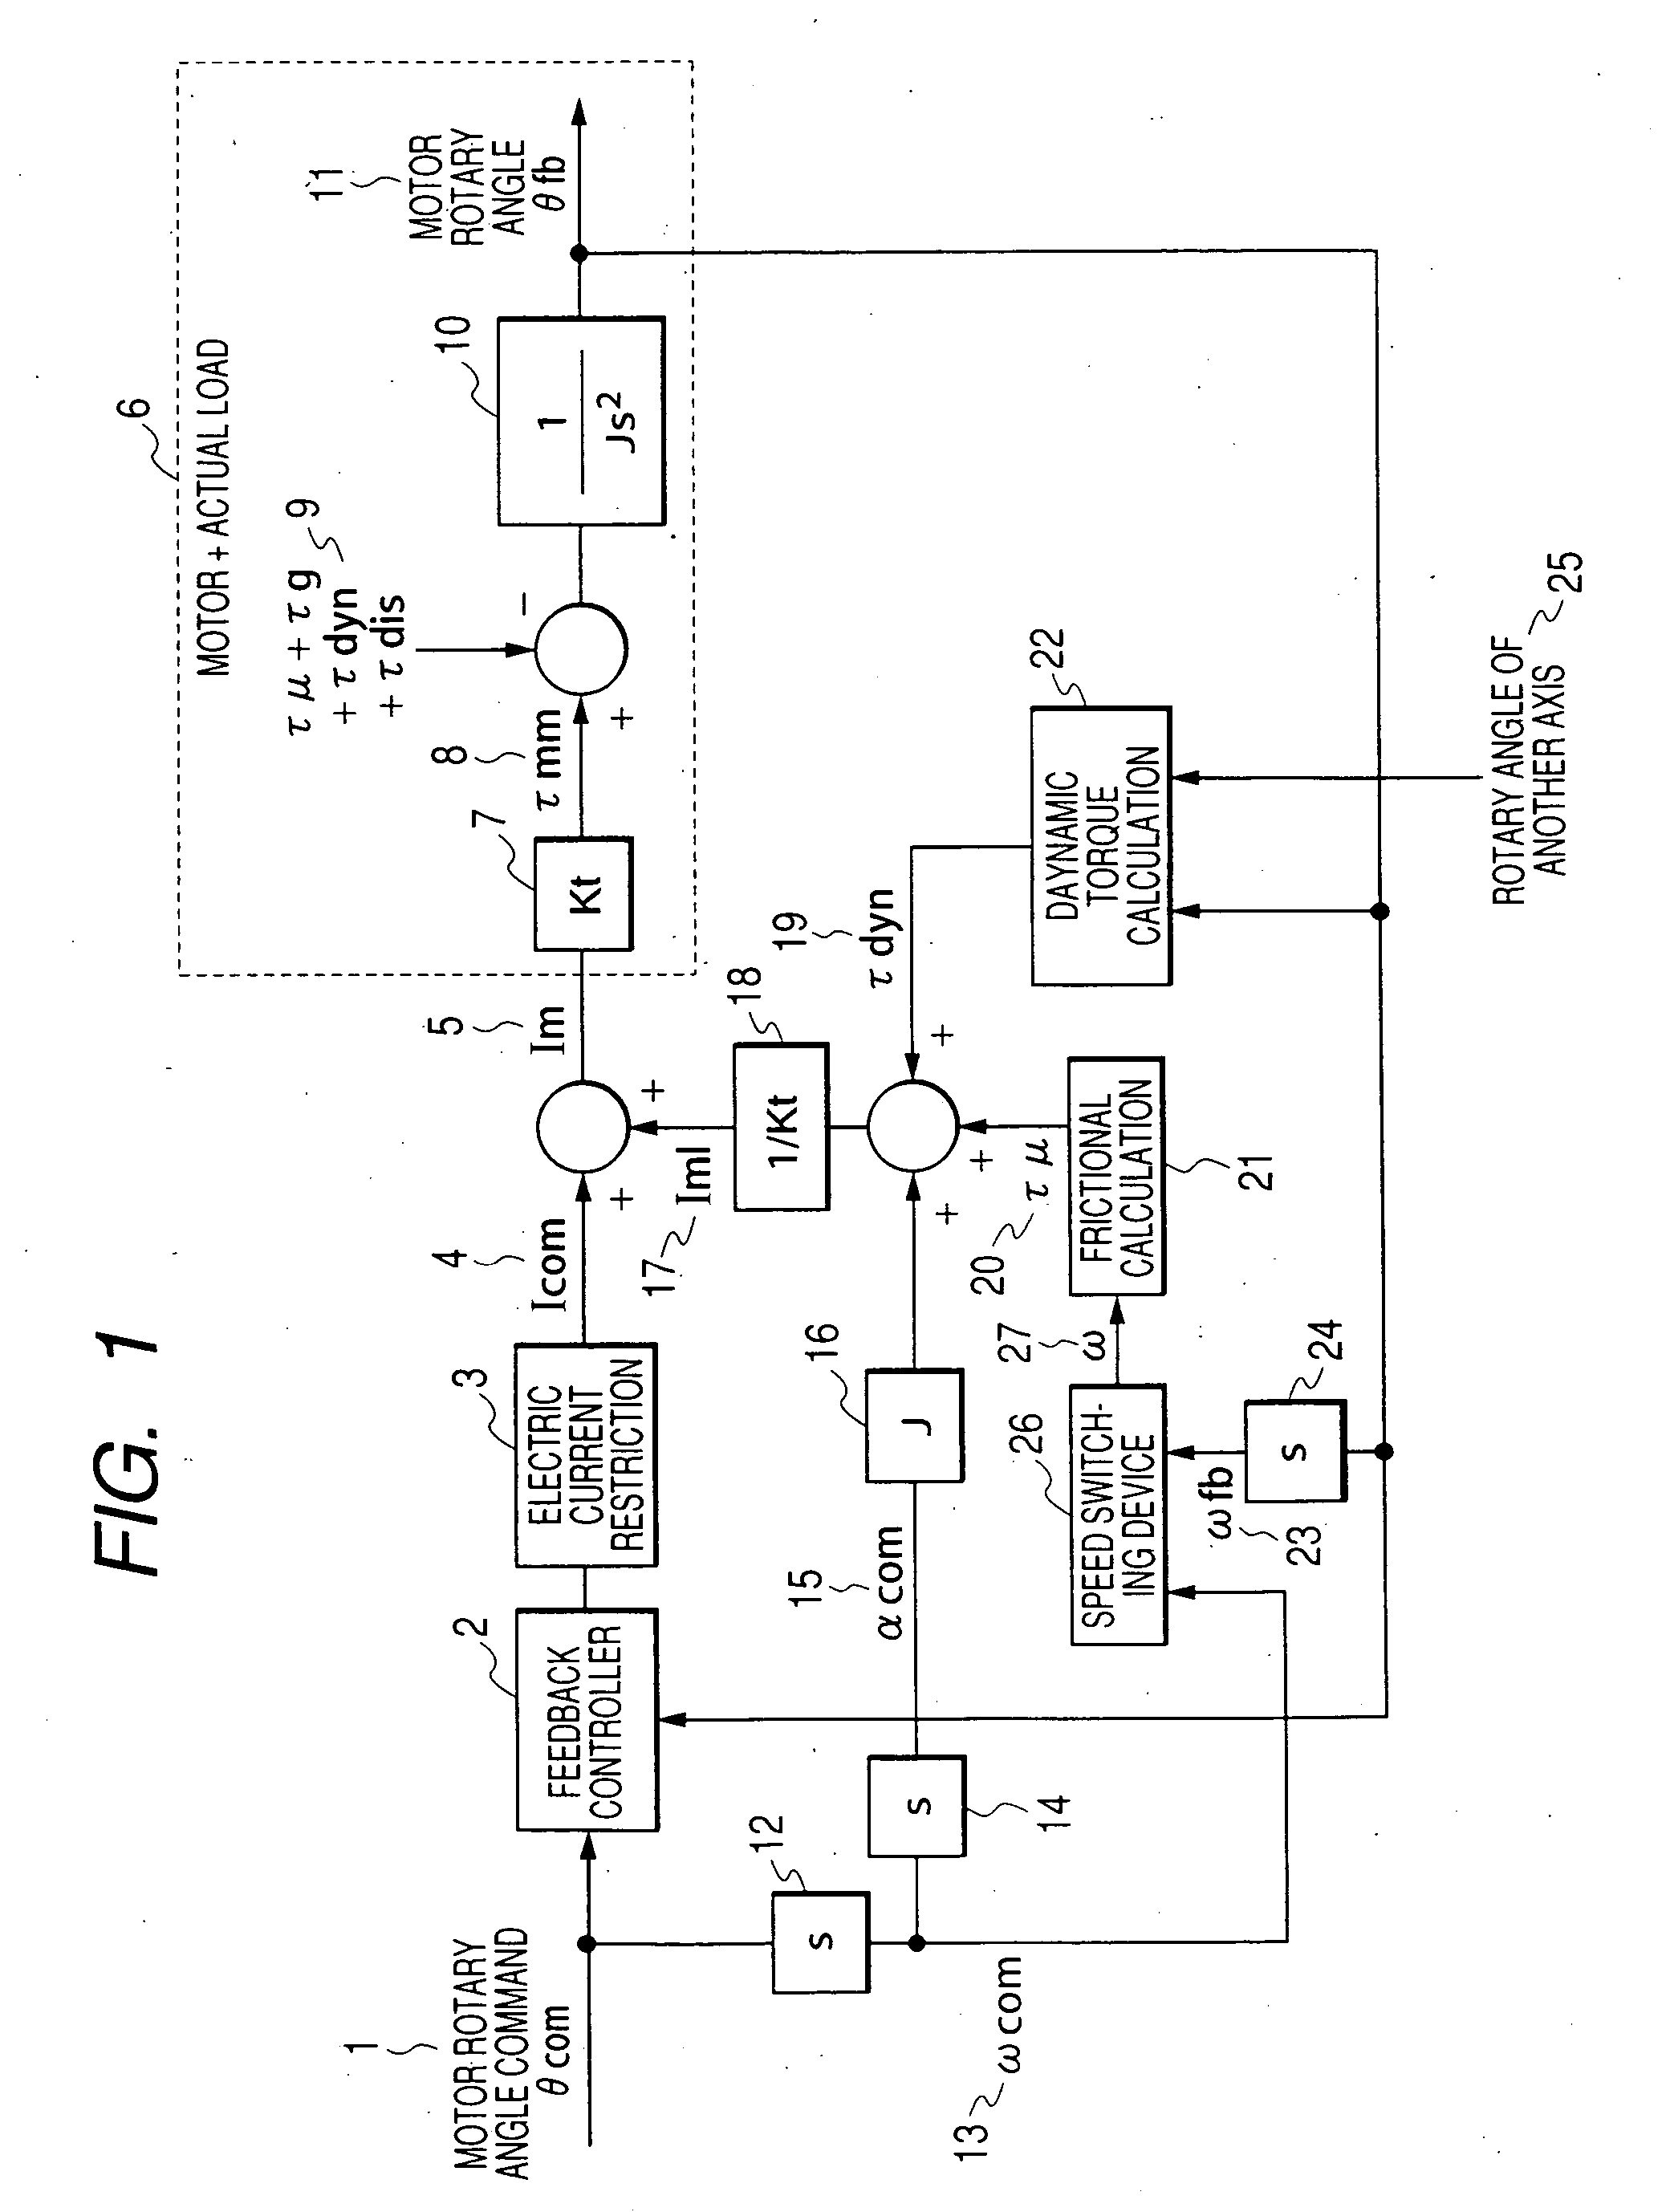 Robot arm control method and control device